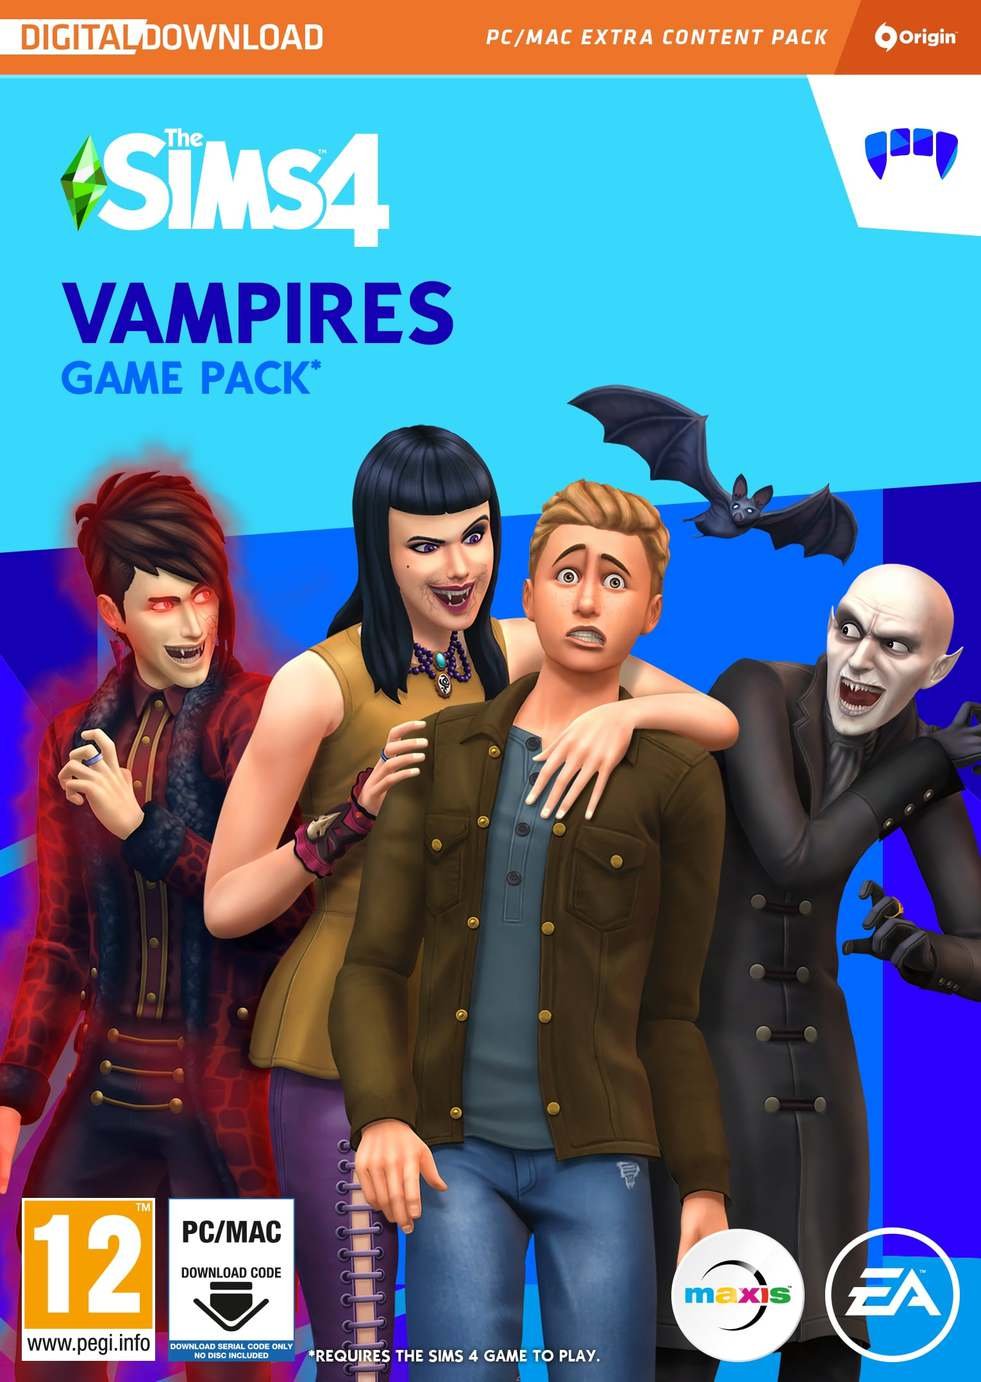 The Sims 4 Vampires Game Pack PC Game